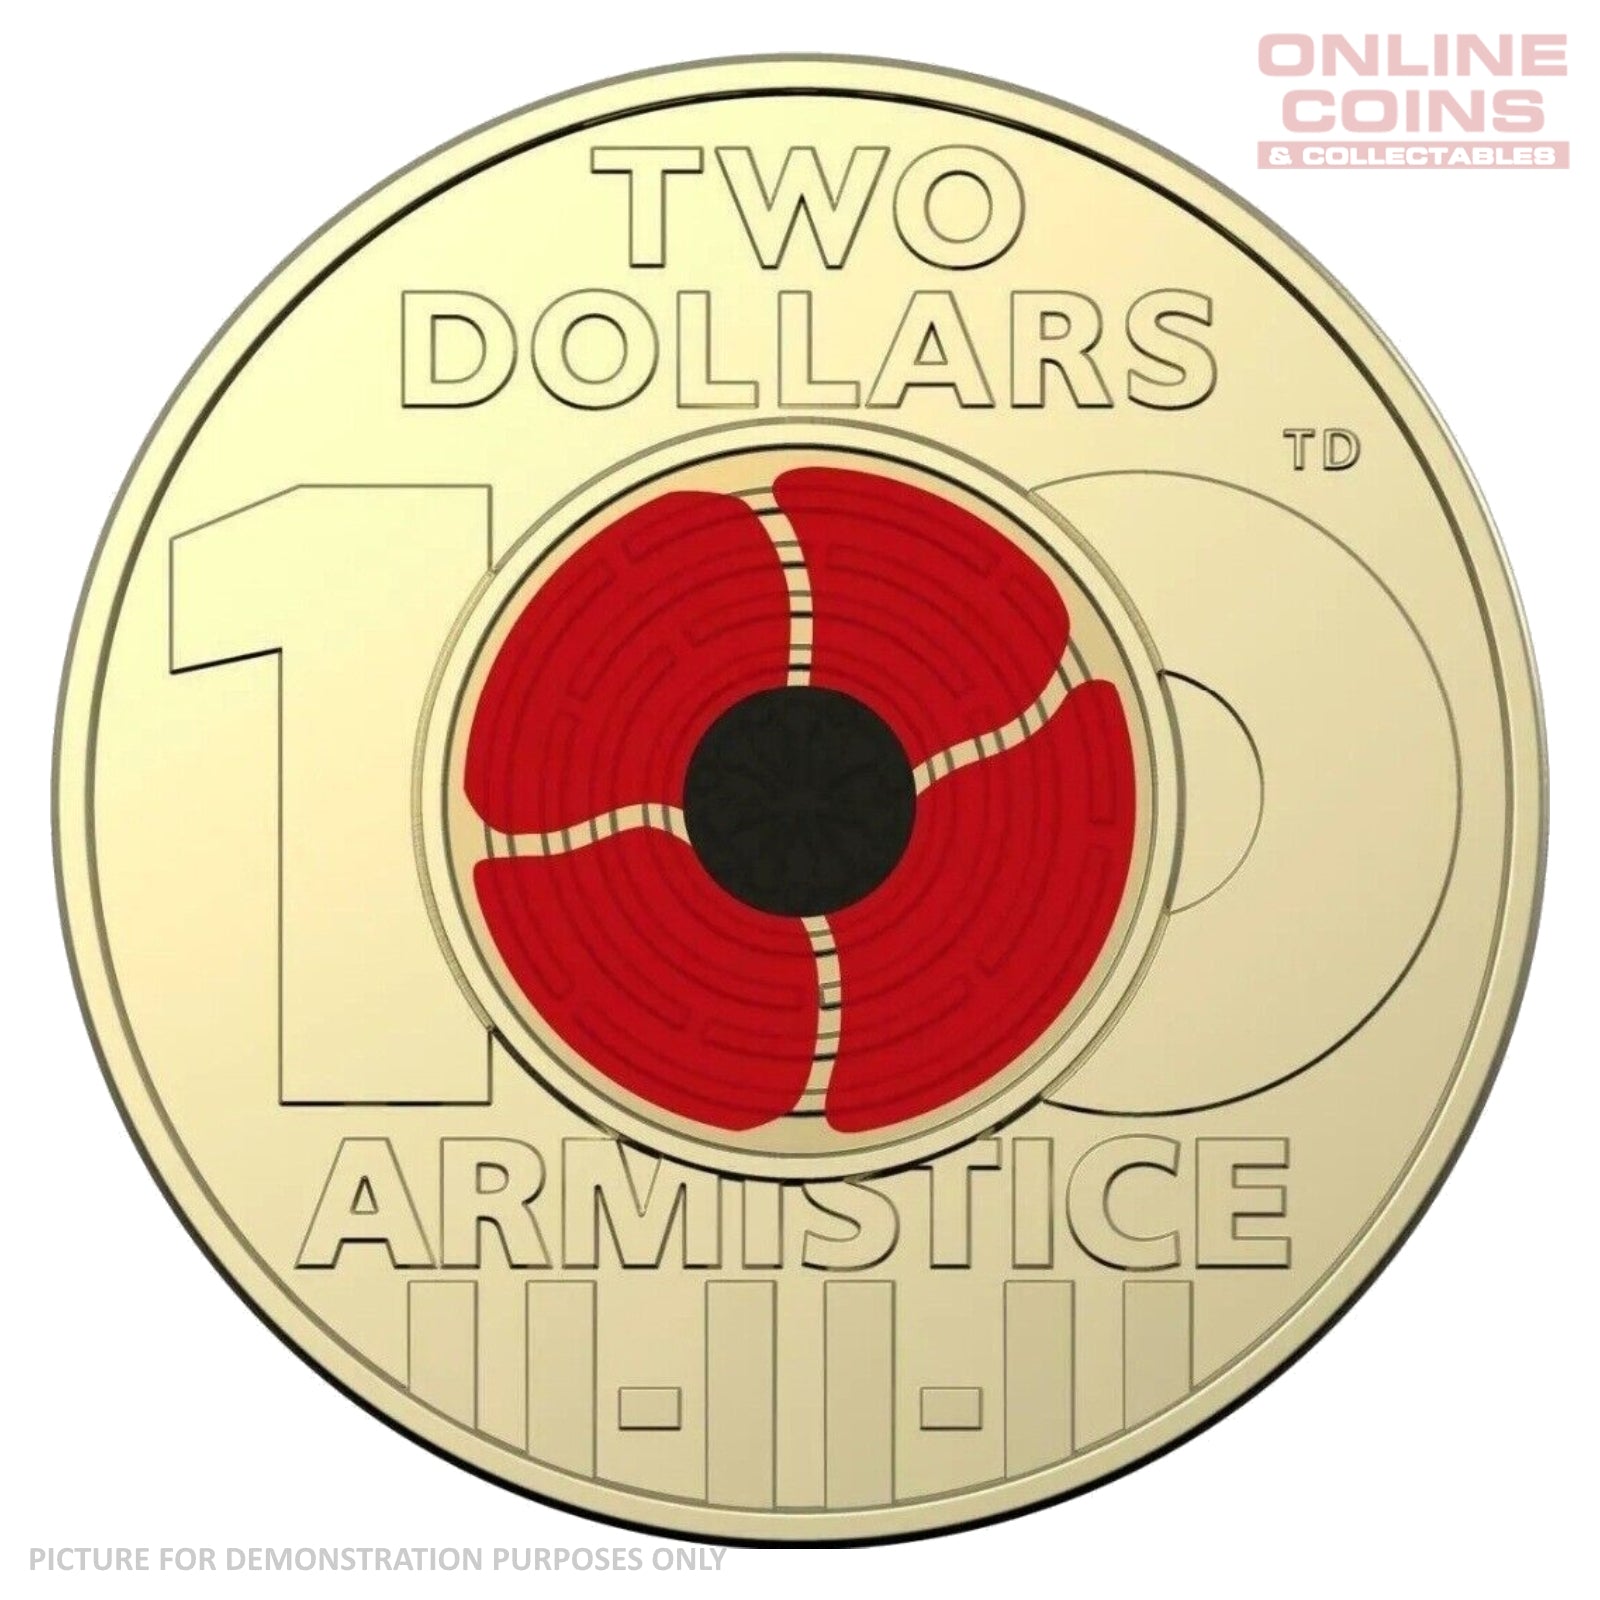 2018 Remembrance Day Armistice Centenary $2 Coloured Loose Coin - Circulated